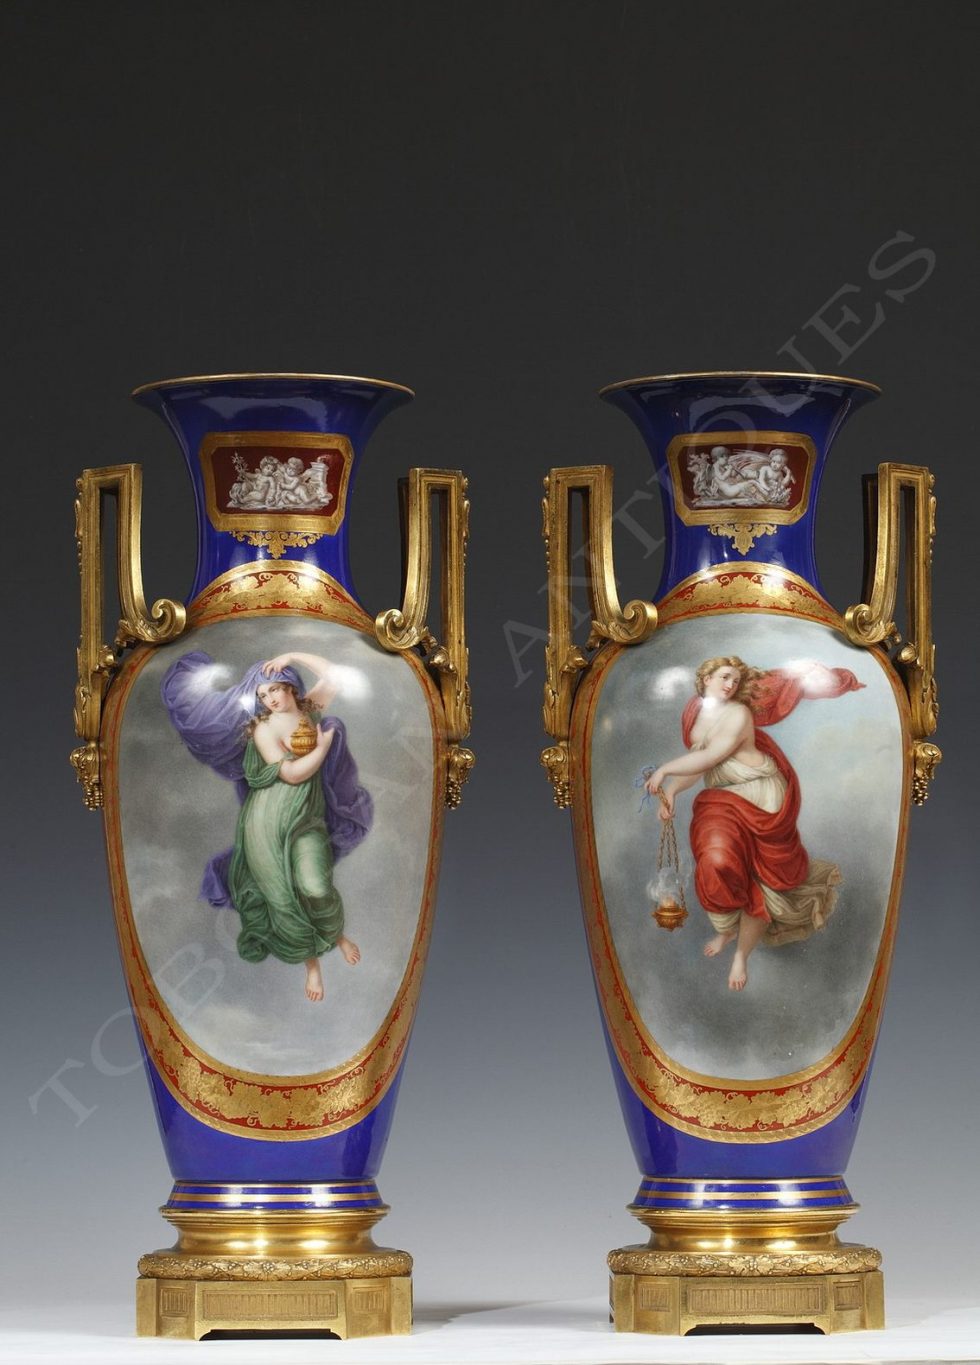 Manufacture of Berlin <br/> A Pair of Porcelain Vases